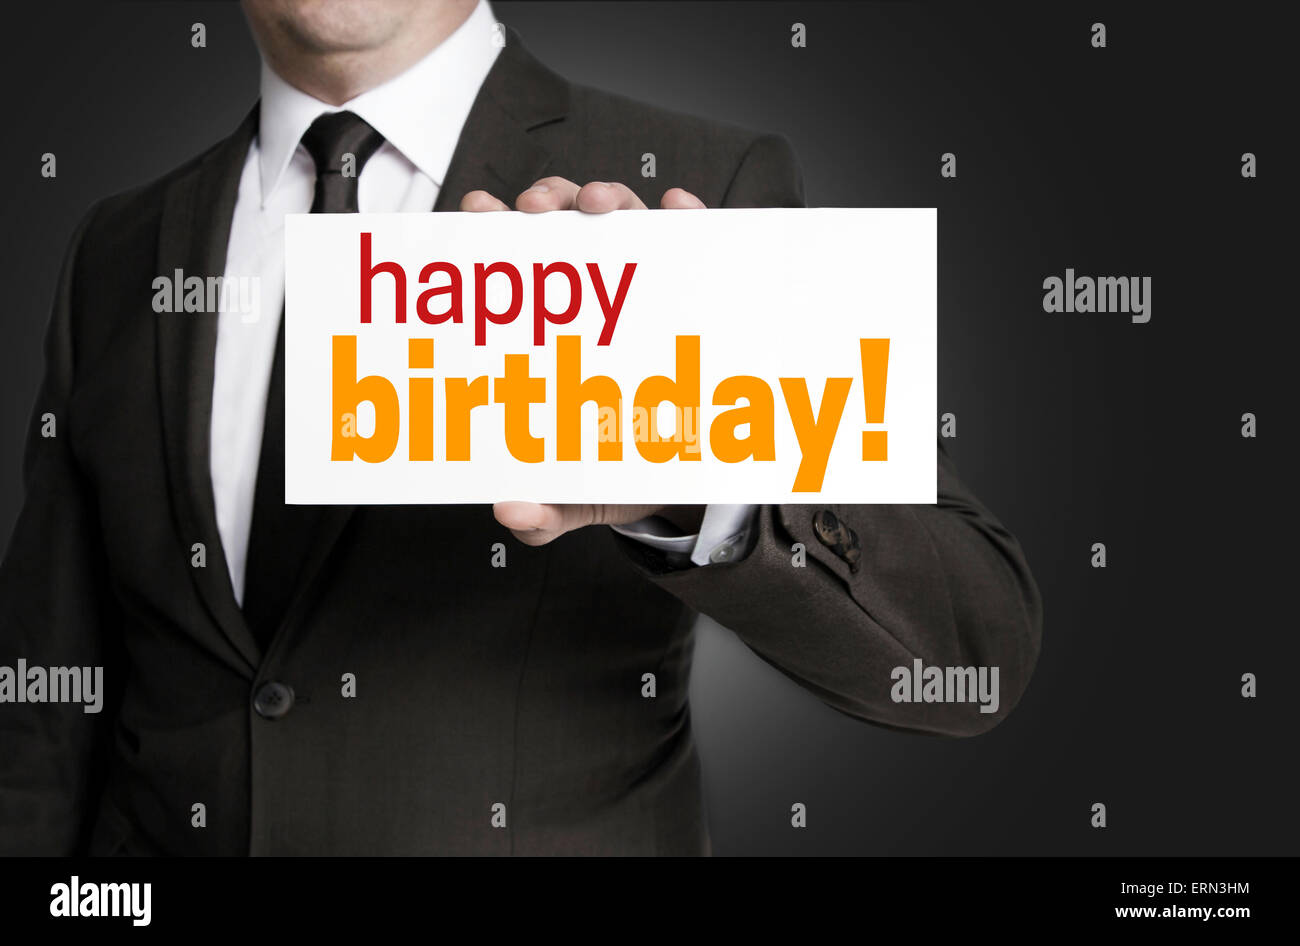 happy birthday sign is held by businessman. Stock Photo